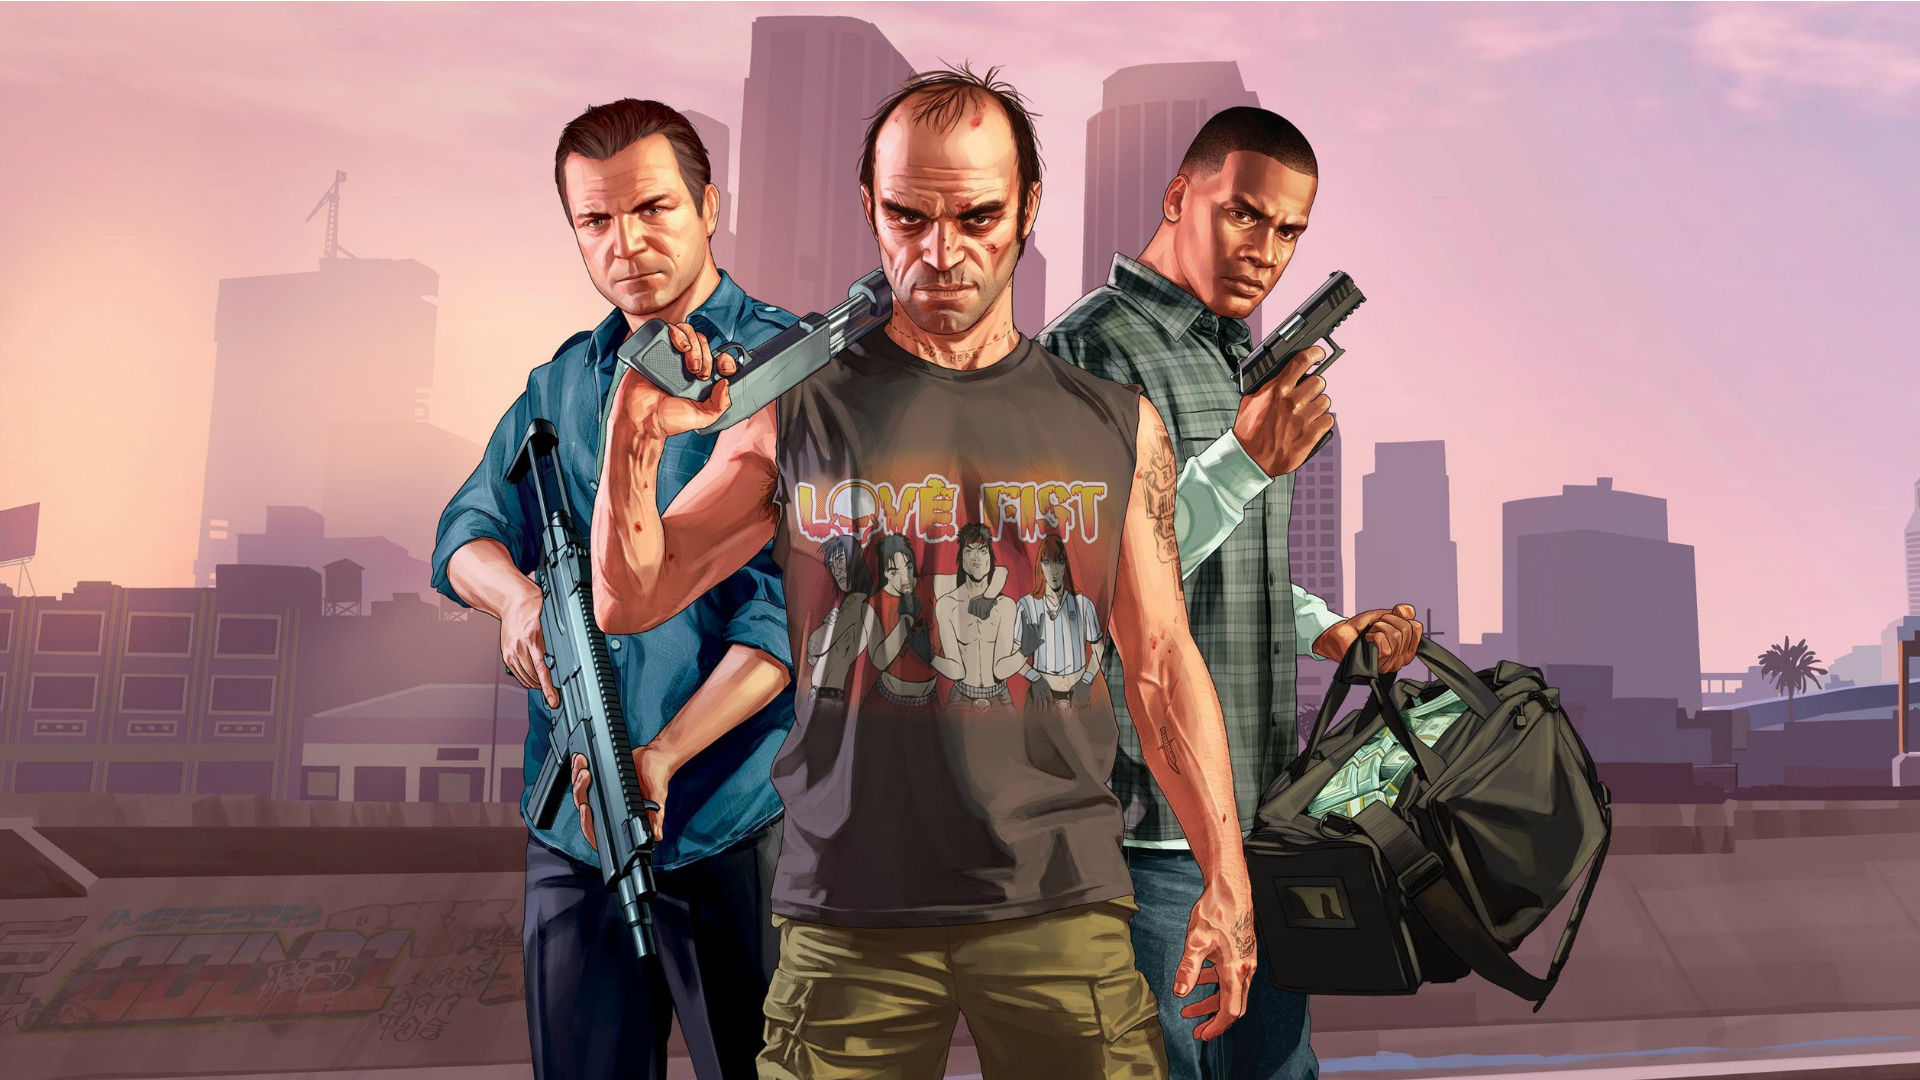 The protagonists of GTA V pose for the camera.